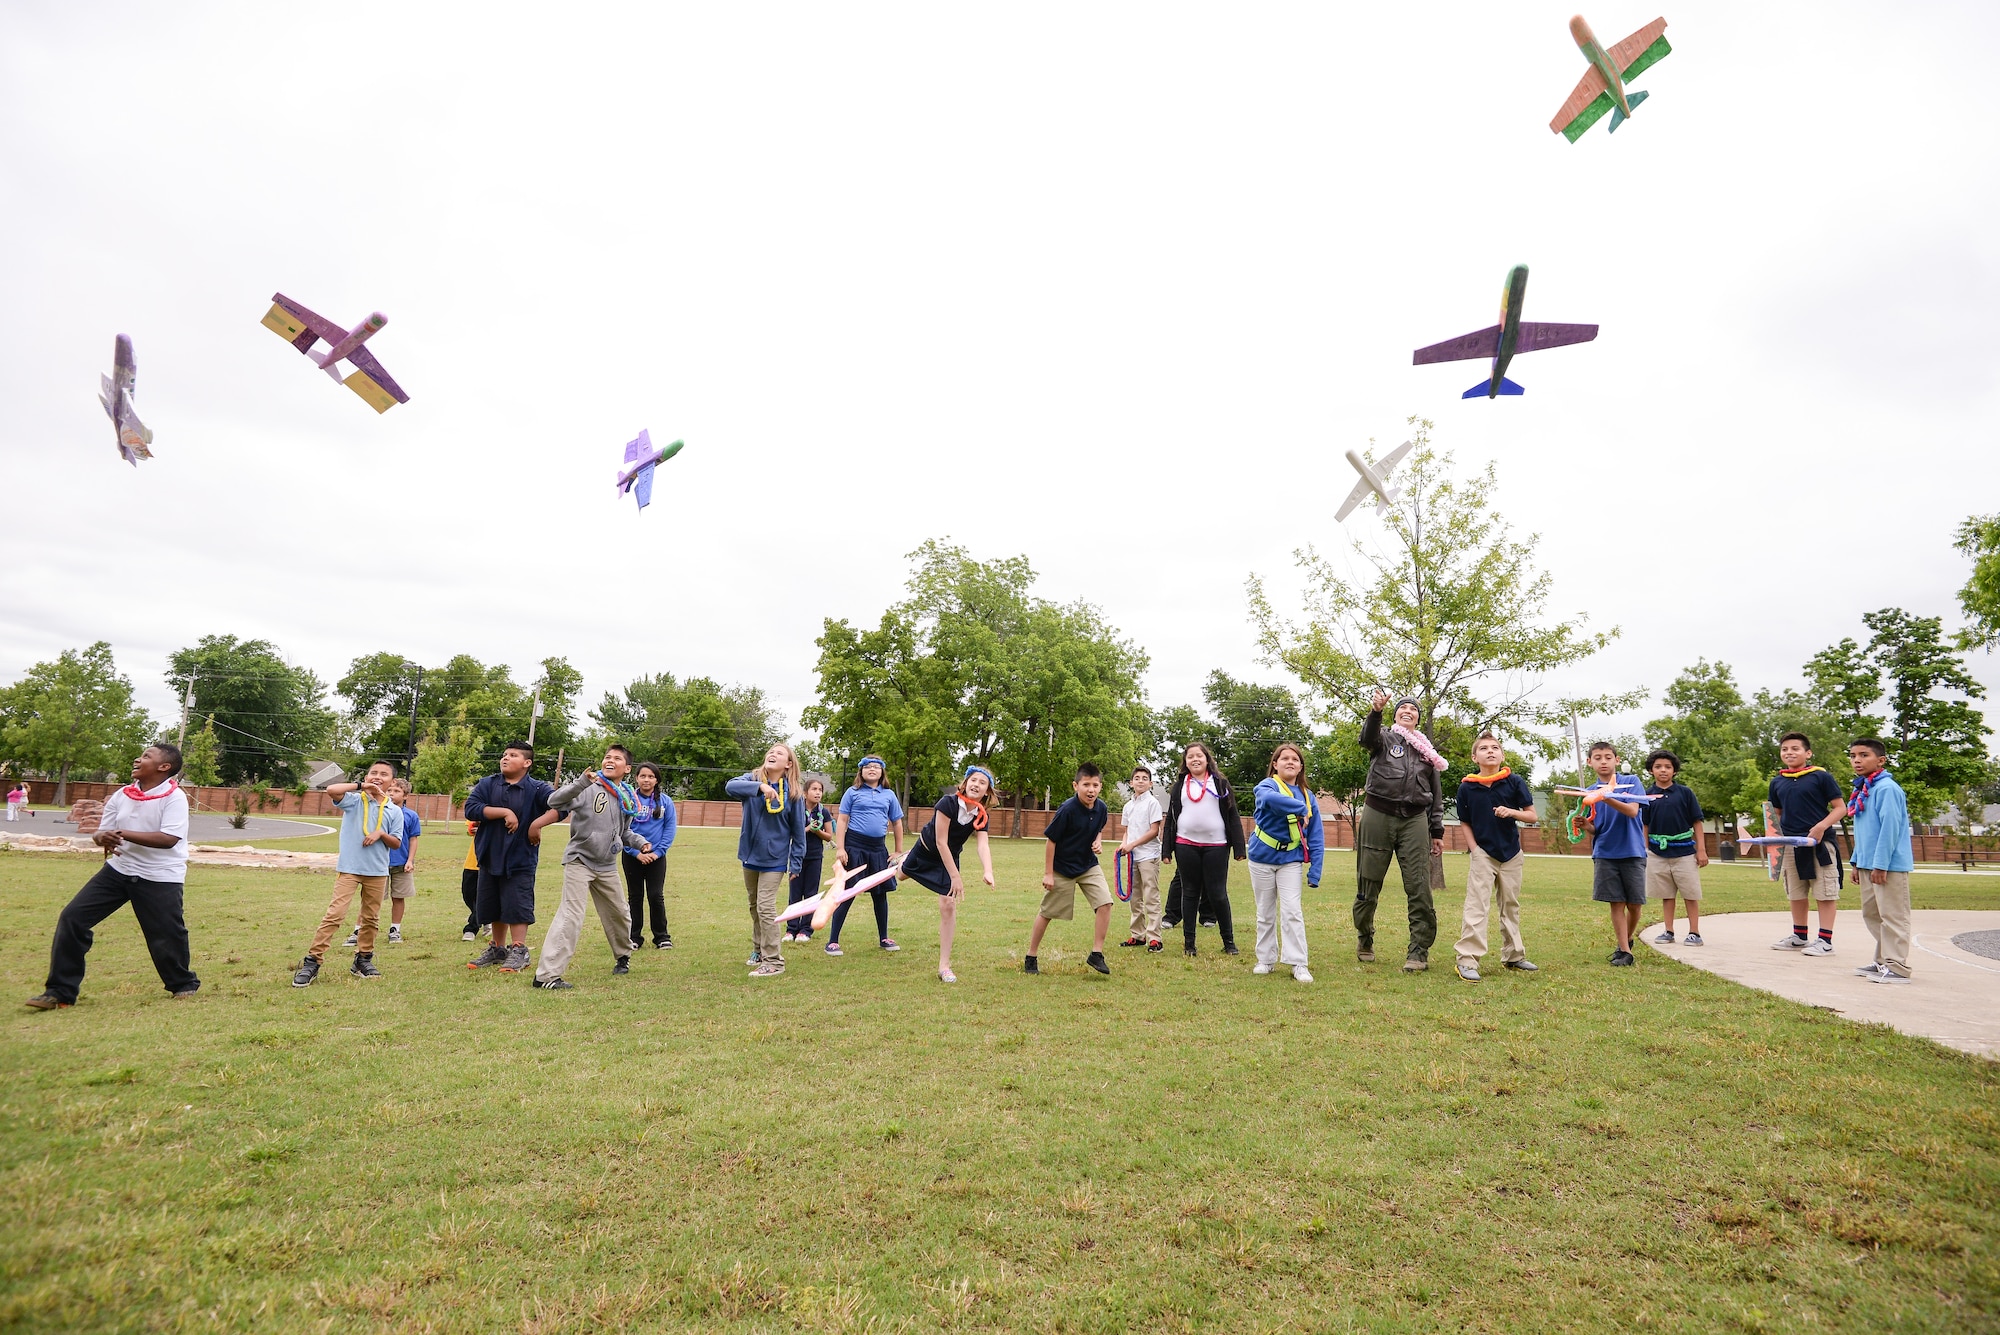 Maj. Donna Mae Williams, a pilot assigned to the 465th Air Refueling Squadron at Tinker Air Force Base, Okla., throws Styrofoam airplanes with 4th grade students from Kendall-Whittier Elementary School on May 20 in Tulsa, Okla. Williams visited the students after corresponding with them about her battle with cancer and career as a pilot in the Air Force Reserve. (Air Force photo by Staff Sgt. Caleb Wanzer/Released)